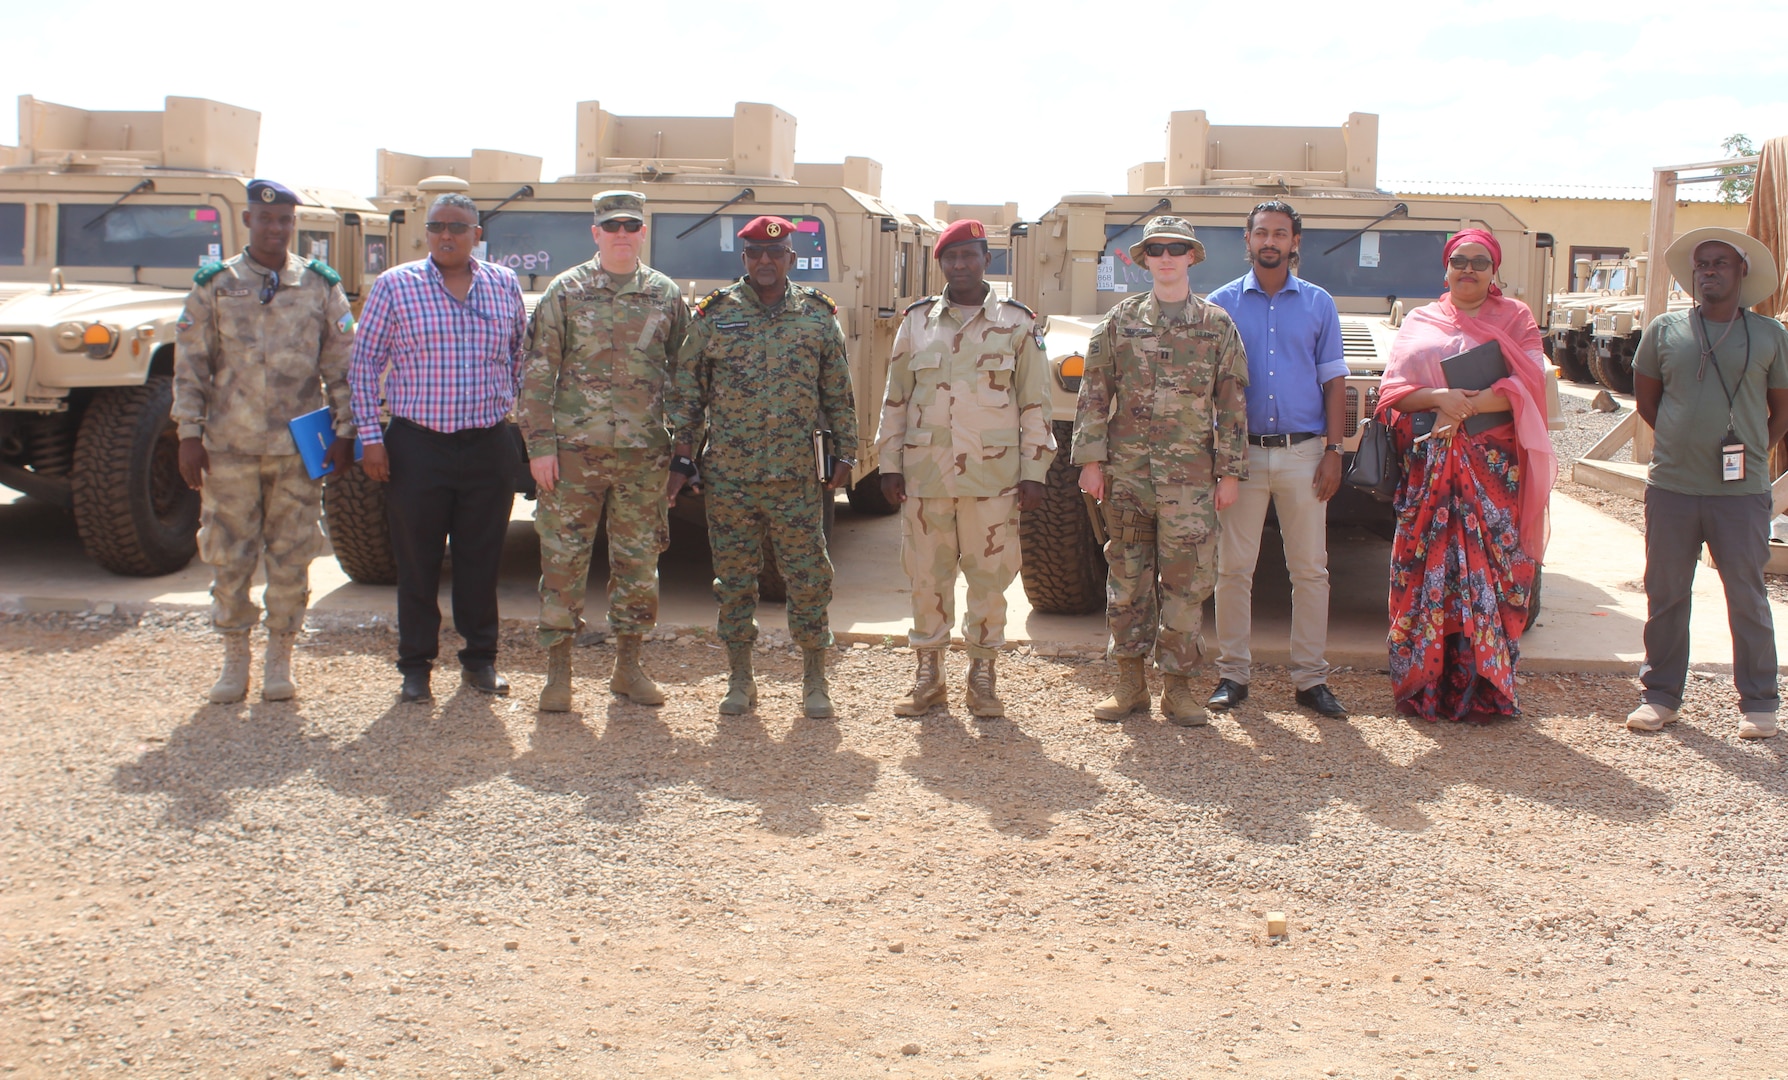 Maj. Jonathan Holliday, Kentucky National Guard Bilateral Affairs Officer (third from left), with U.S. Embassy local staff and Forces Armees Djiboutian (FAD) personnel in Djibouti.